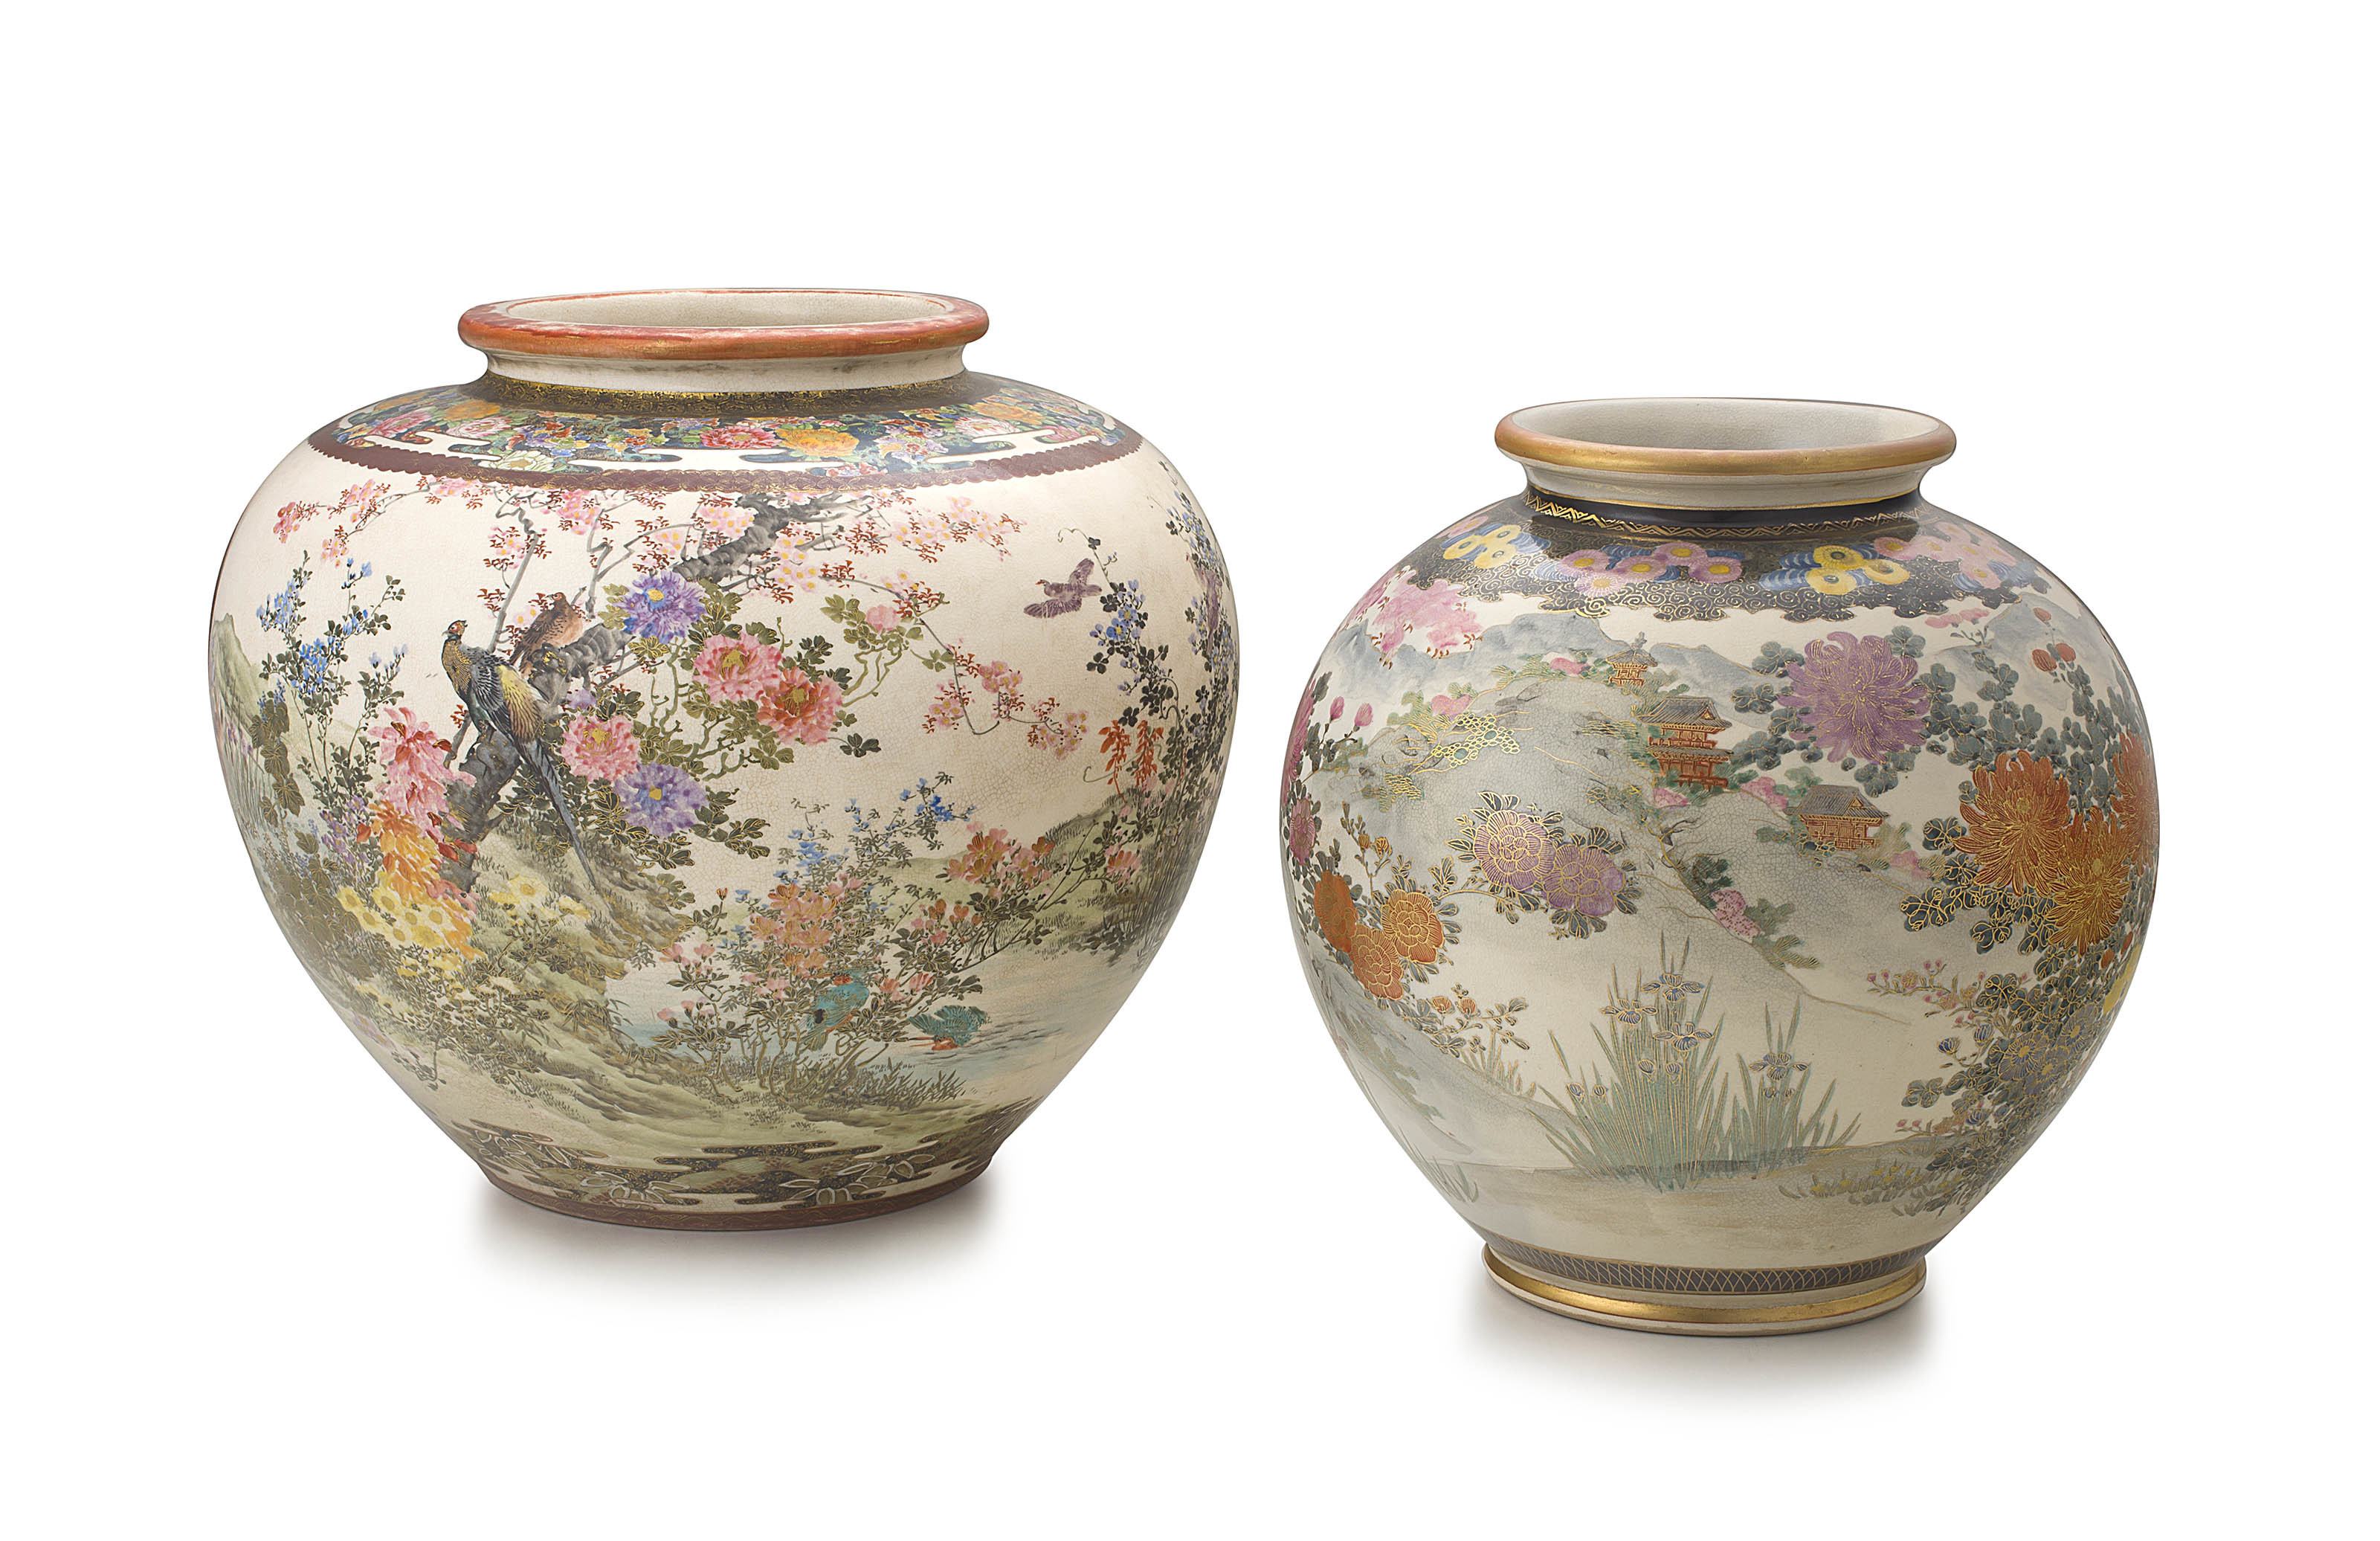 A Japanese earthenware vase, early 20th century